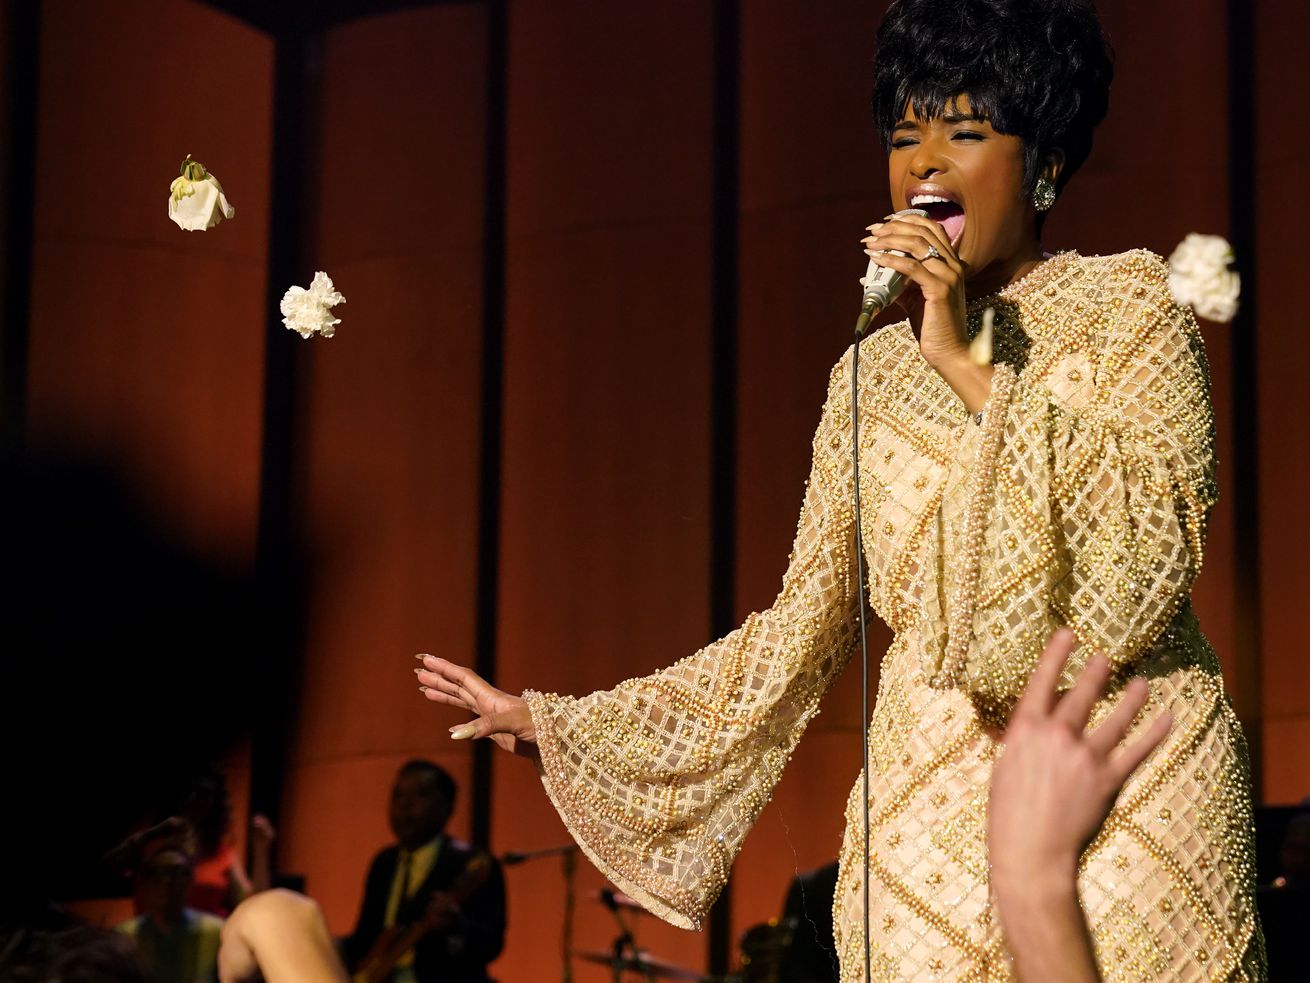 The new Aretha Franklin movie shows how tricky it is to make a great musician biopic